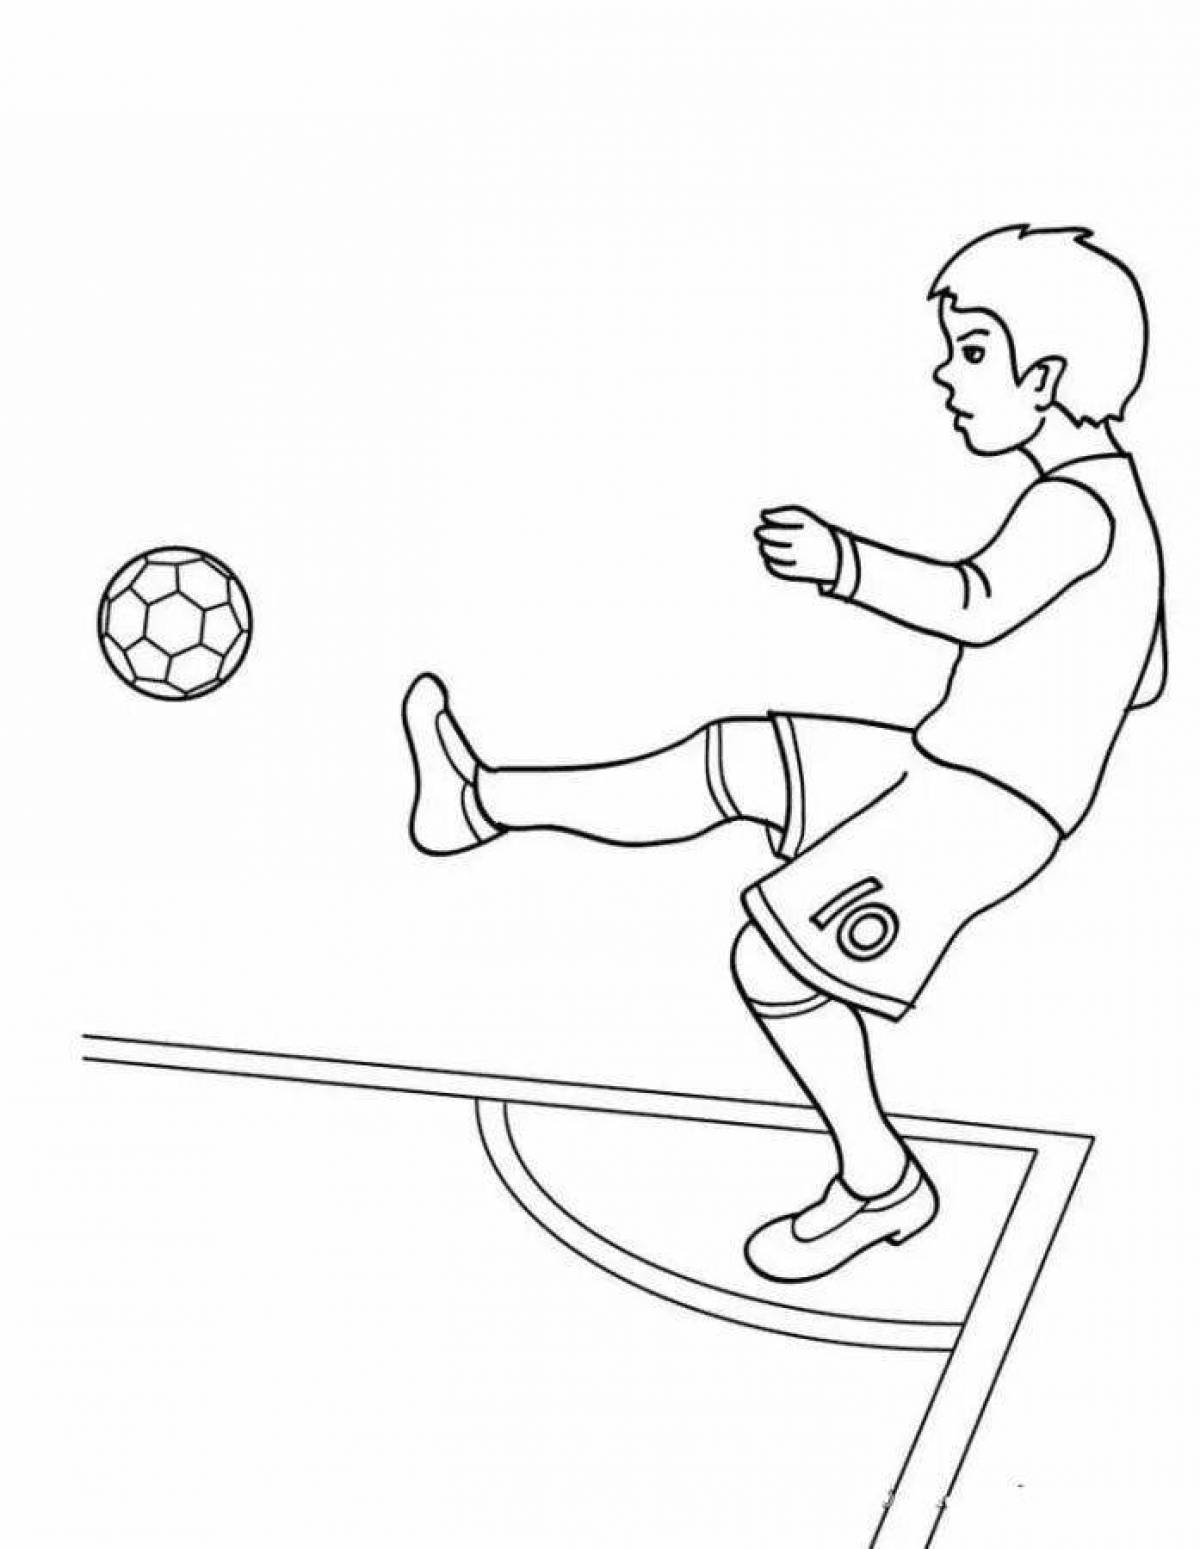 Playful football coloring page for kids